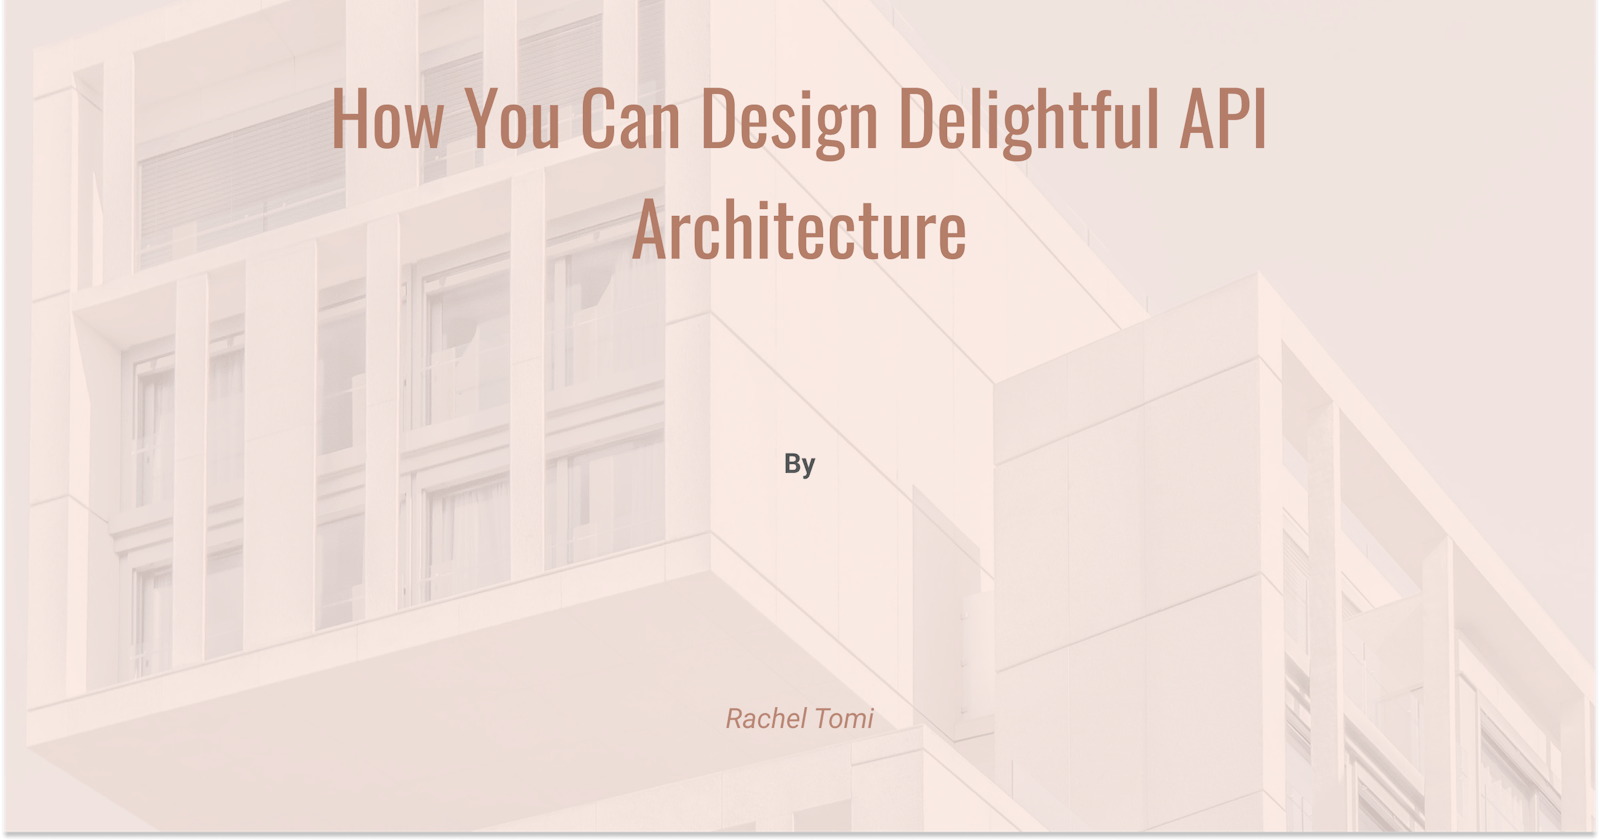 How You Can Design Delightful API Architecture